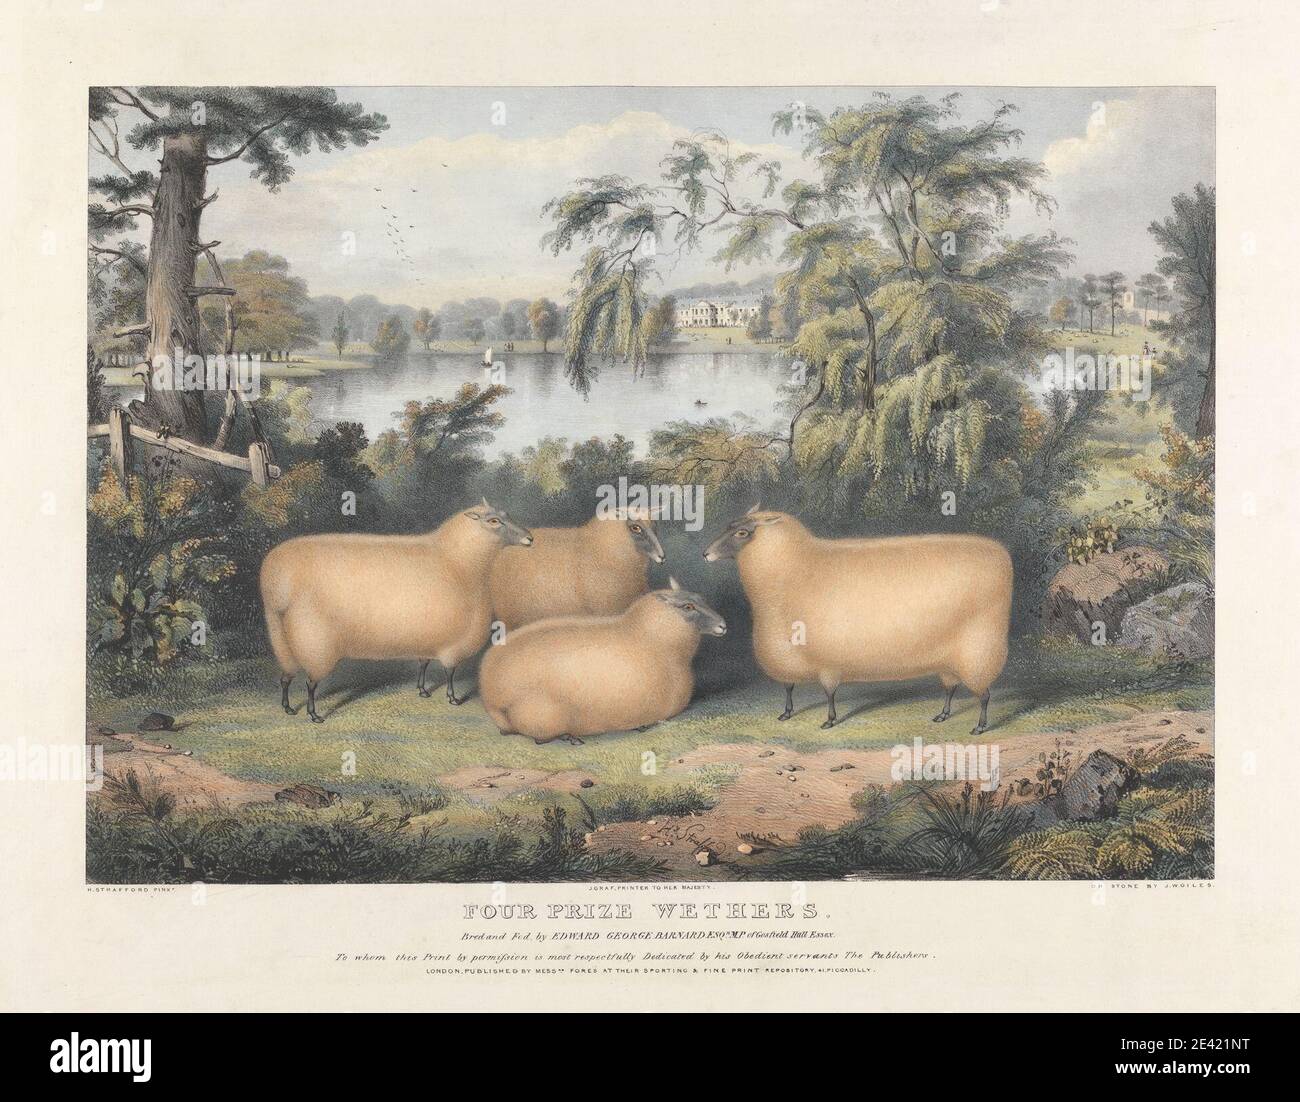 Print made by John West Giles, active 1827â€“1865, Four Prize Wethers, 1837. Lithograph with hand coloring on thick, slightly textured, cream wove paper.   agronomy , animal art , ewe (animal) , farming , husbandry , obesity , science Stock Photo